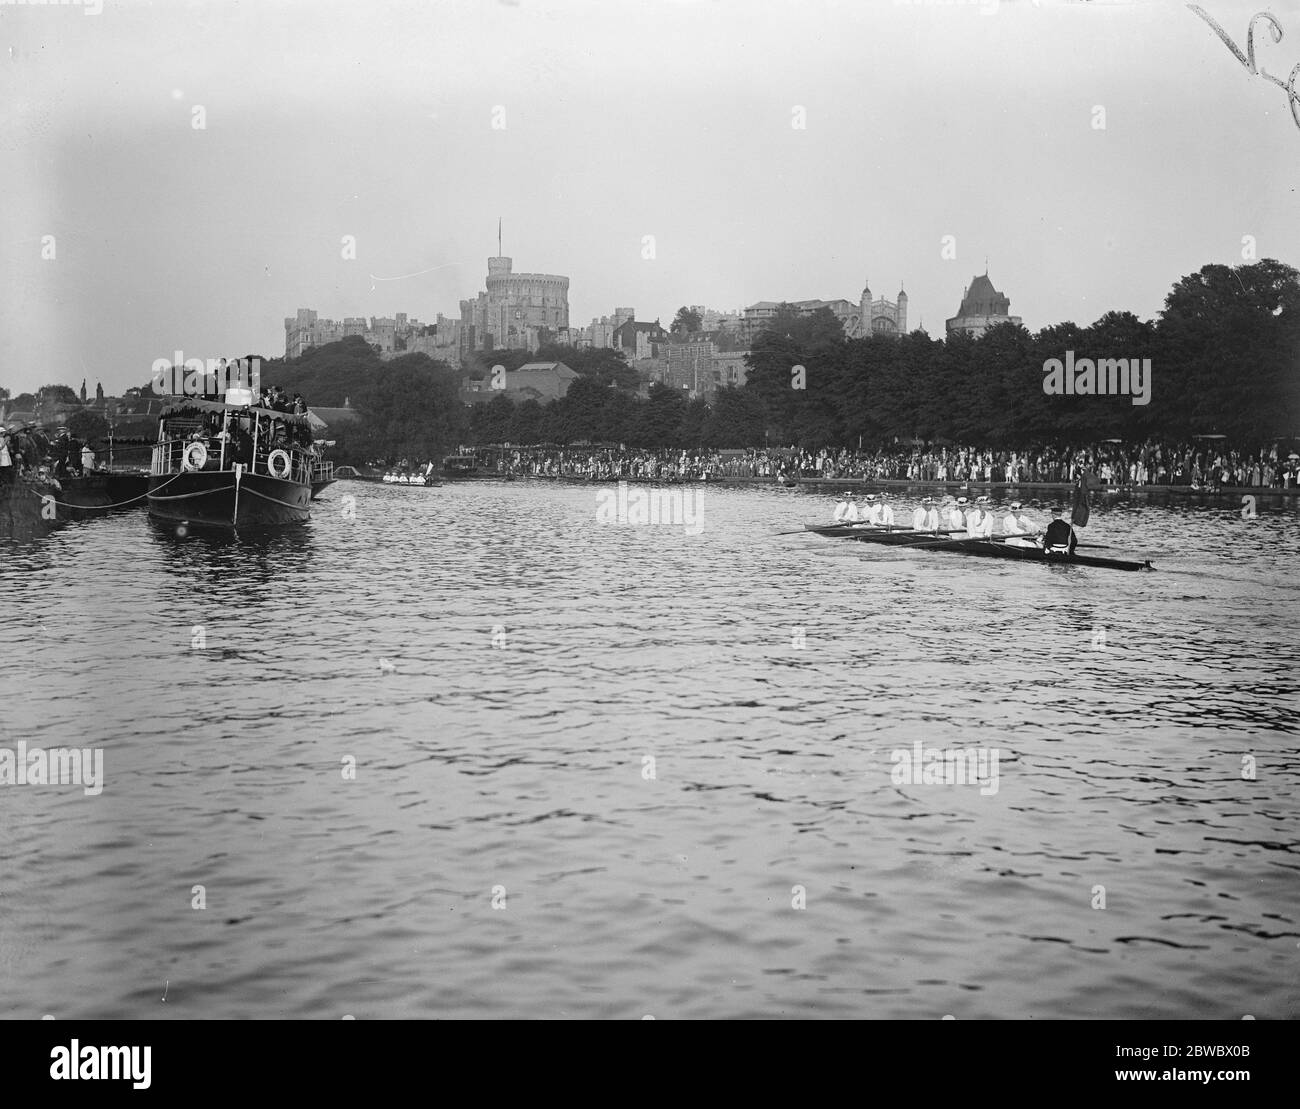 The fourth of June celebrations at Eton . The procession of boats on the river . 4 June 1925 Stock Photo